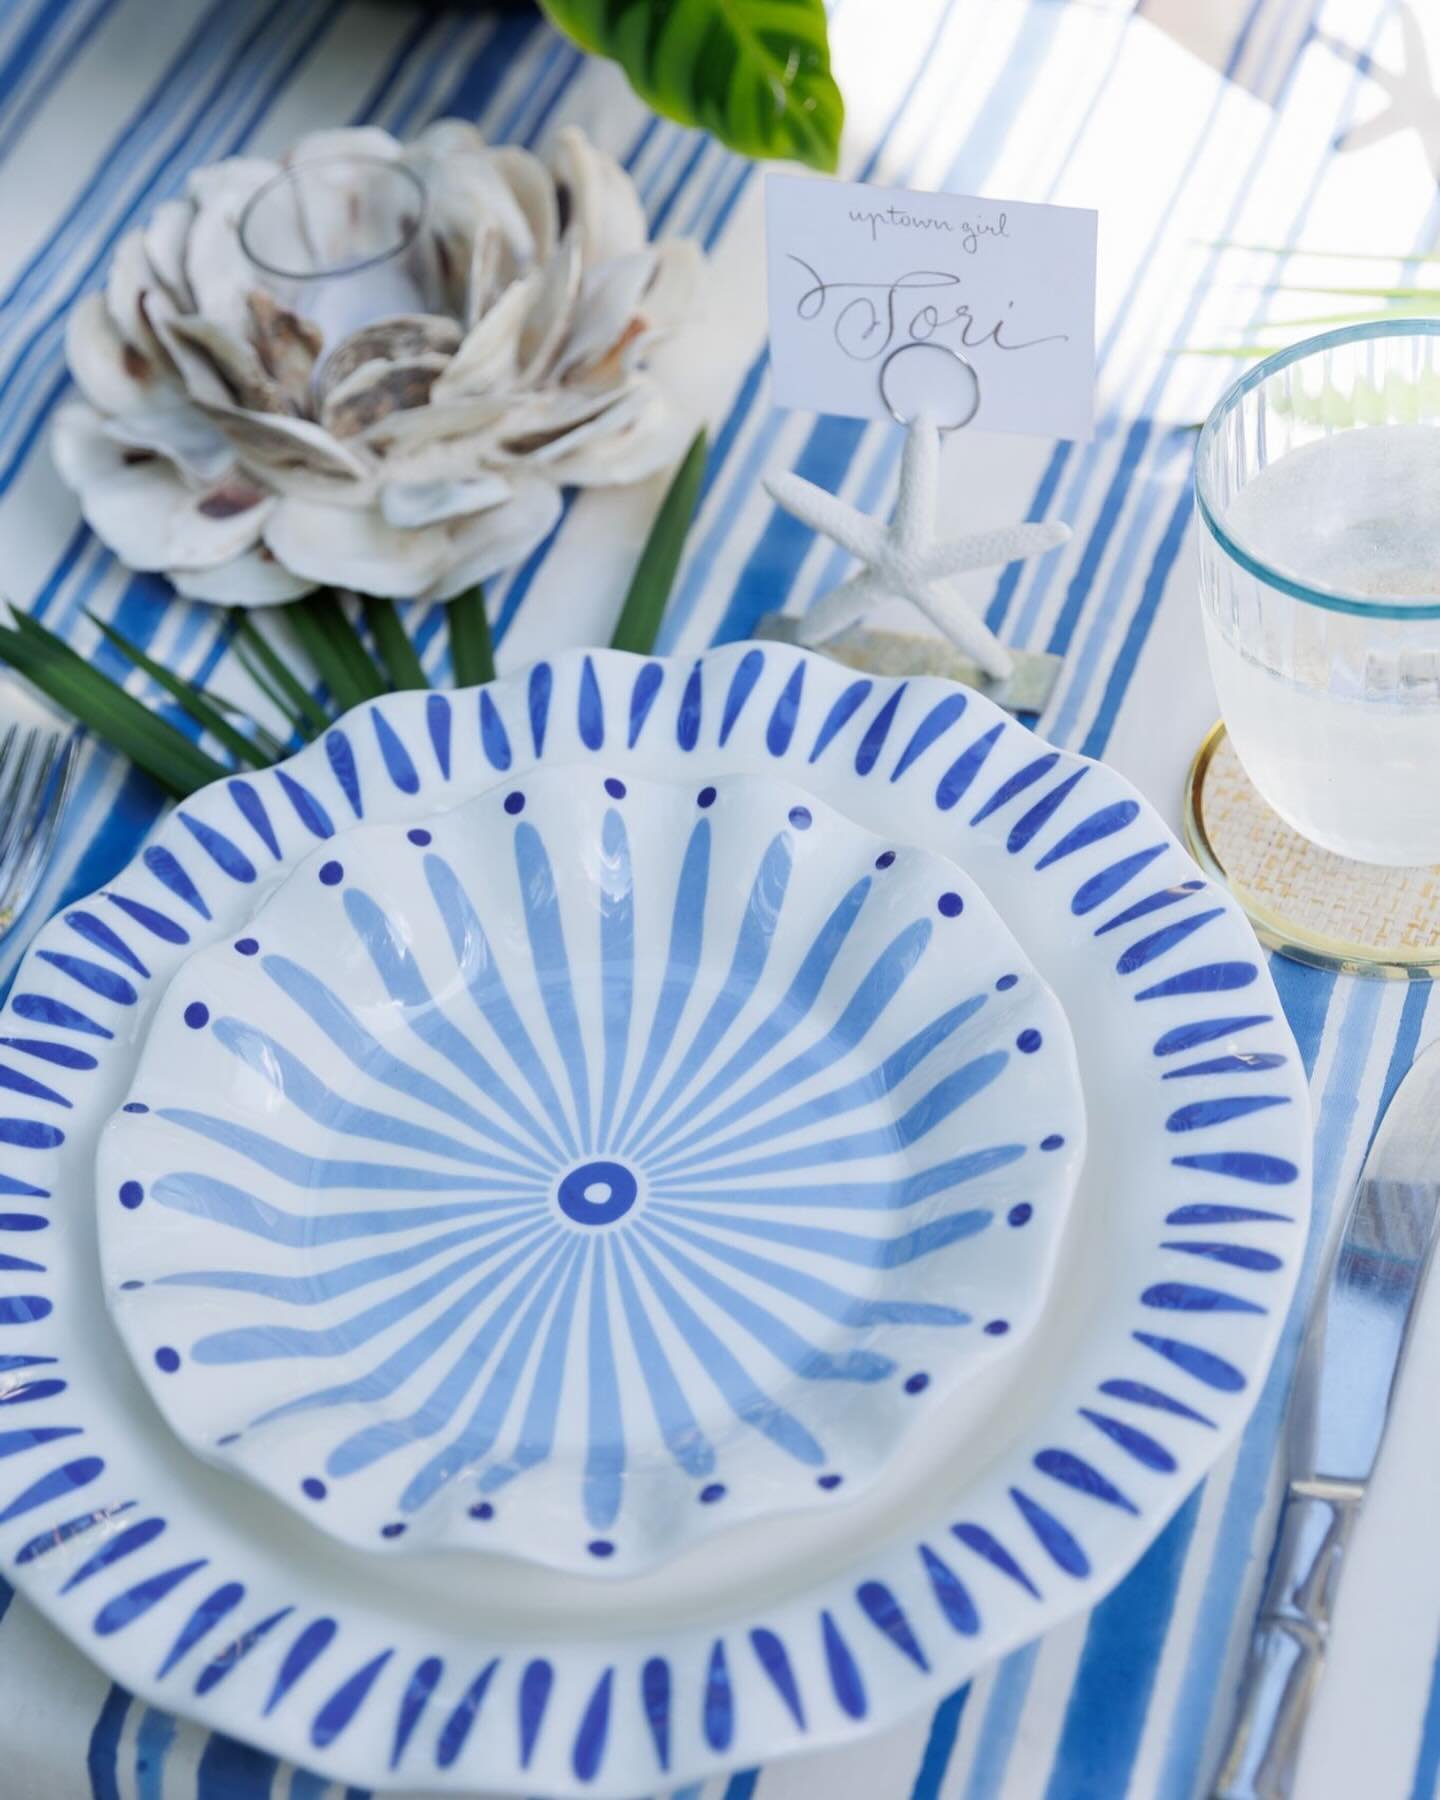 If you&rsquo;re in the market for chic coastal decor, look no further than @cailinicoastal. I love everything she curates for her online shop, and I had the best time styling some of her beautiful dinnerware and new linens while in Palm Beach. Once a